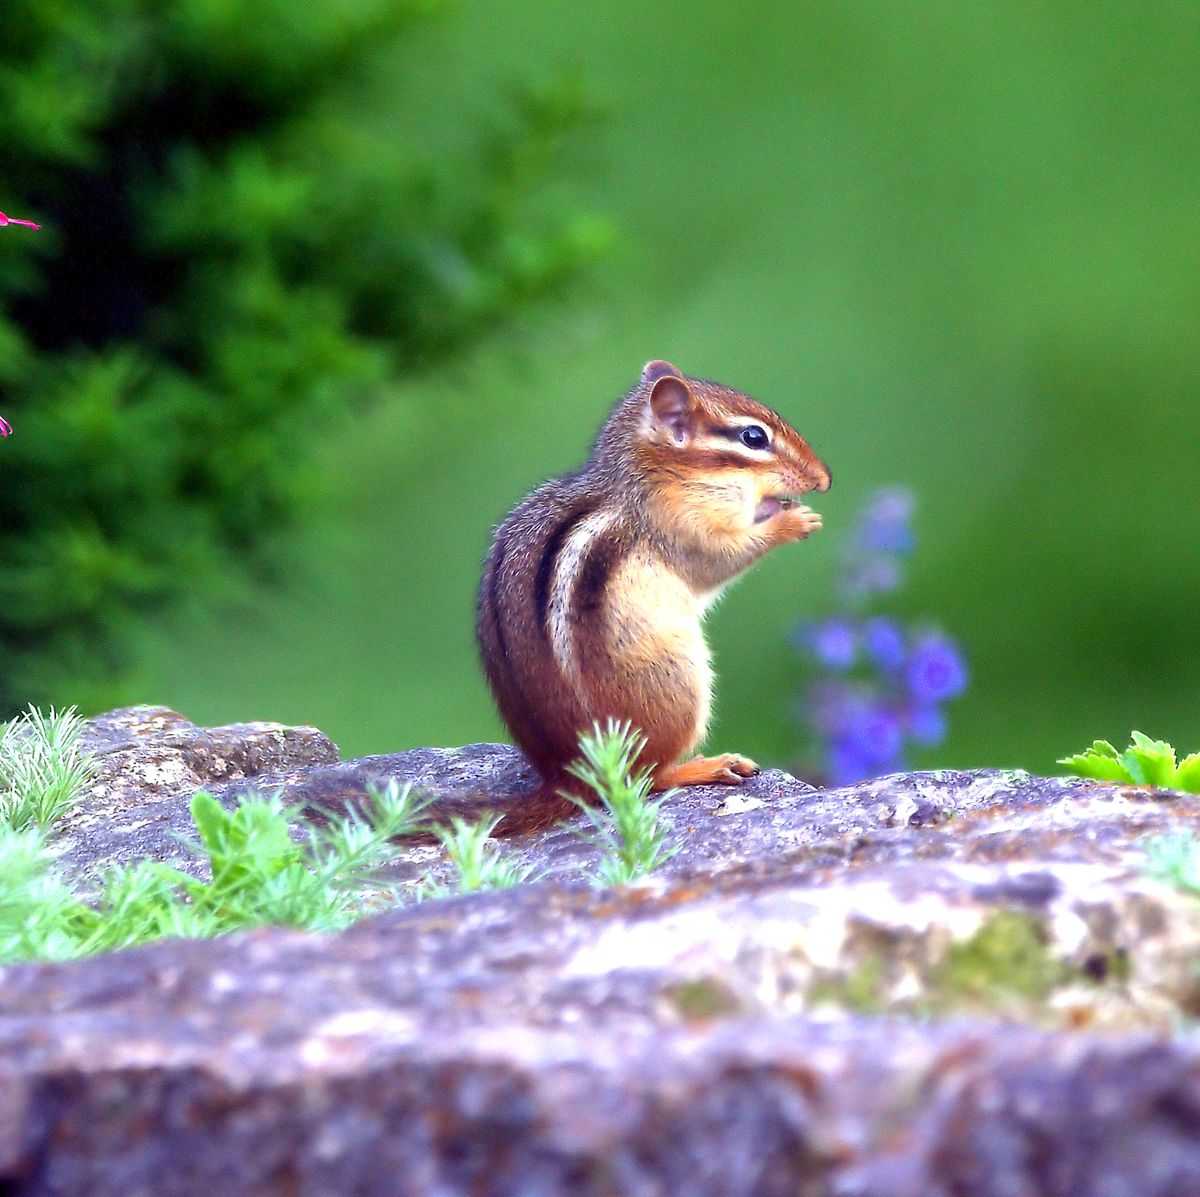 https://hips.hearstapps.com/hmg-prod/images/chipmunk-eating-on-a-stone-wall-in-a-colorful-royalty-free-image-1692820271.jpg?crop=0.601xw:1.00xh;0.237xw,0&resize=1200:*